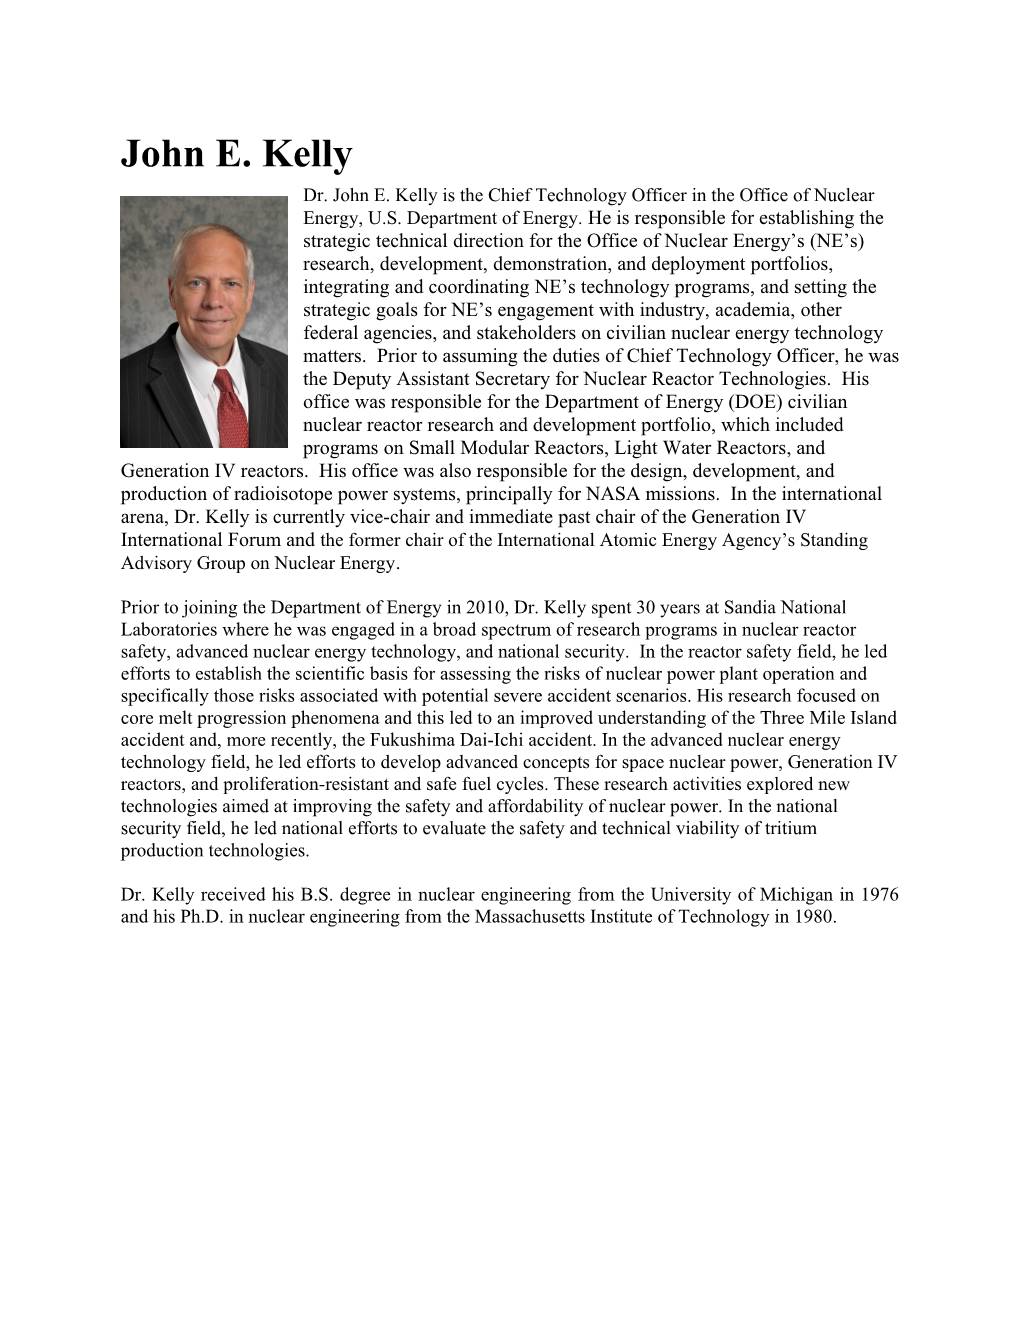 Dr. John E. Kelly Is the Chief Technology Officer in the Office of Nuclear Energy, U.S